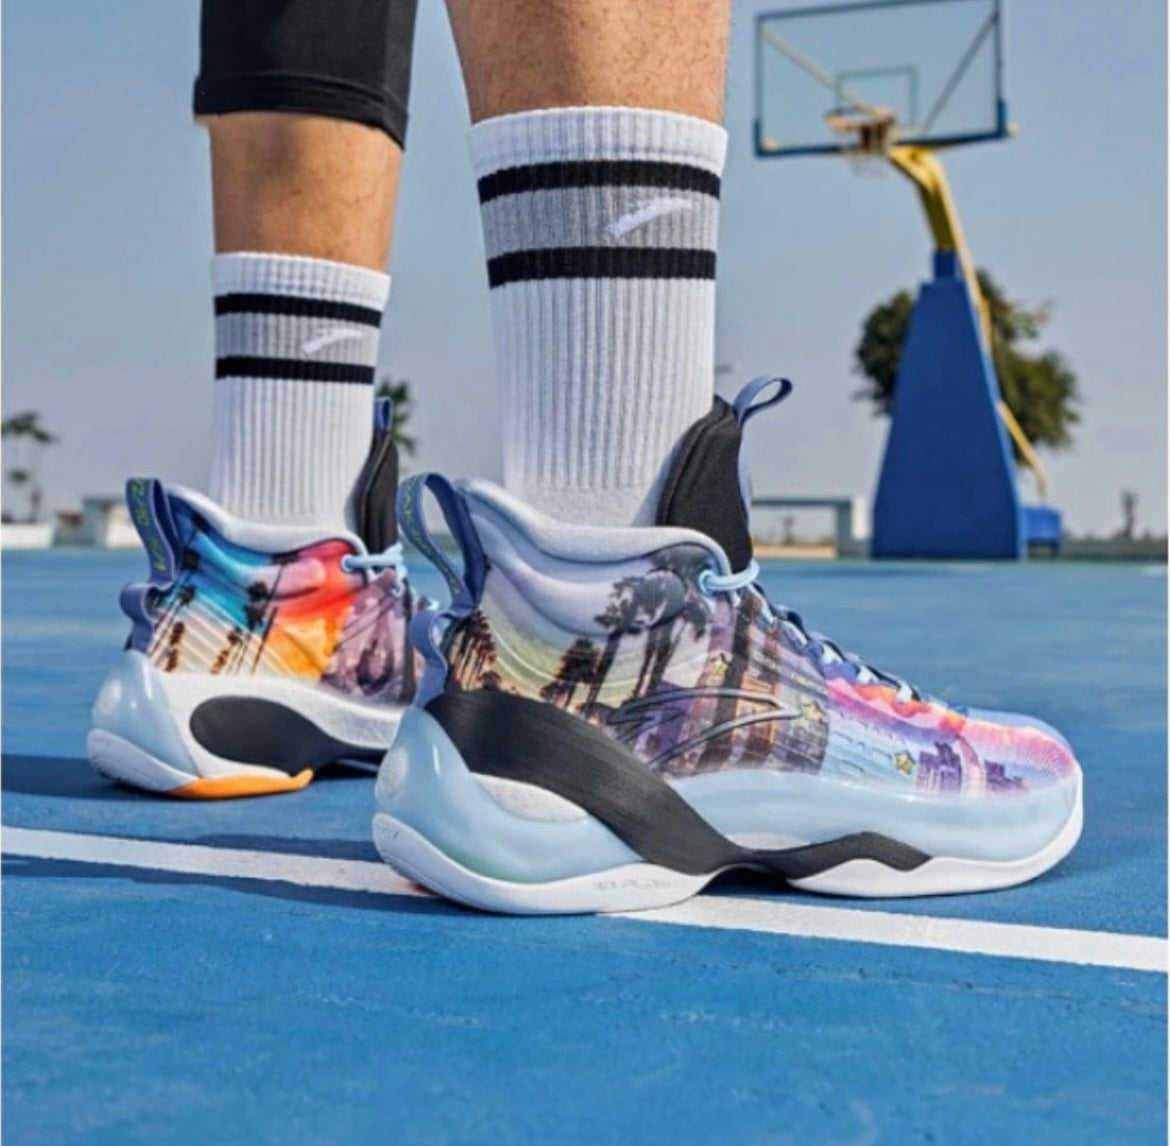 Anta Klay Thompson basketball shoes worn by pro basketball  players